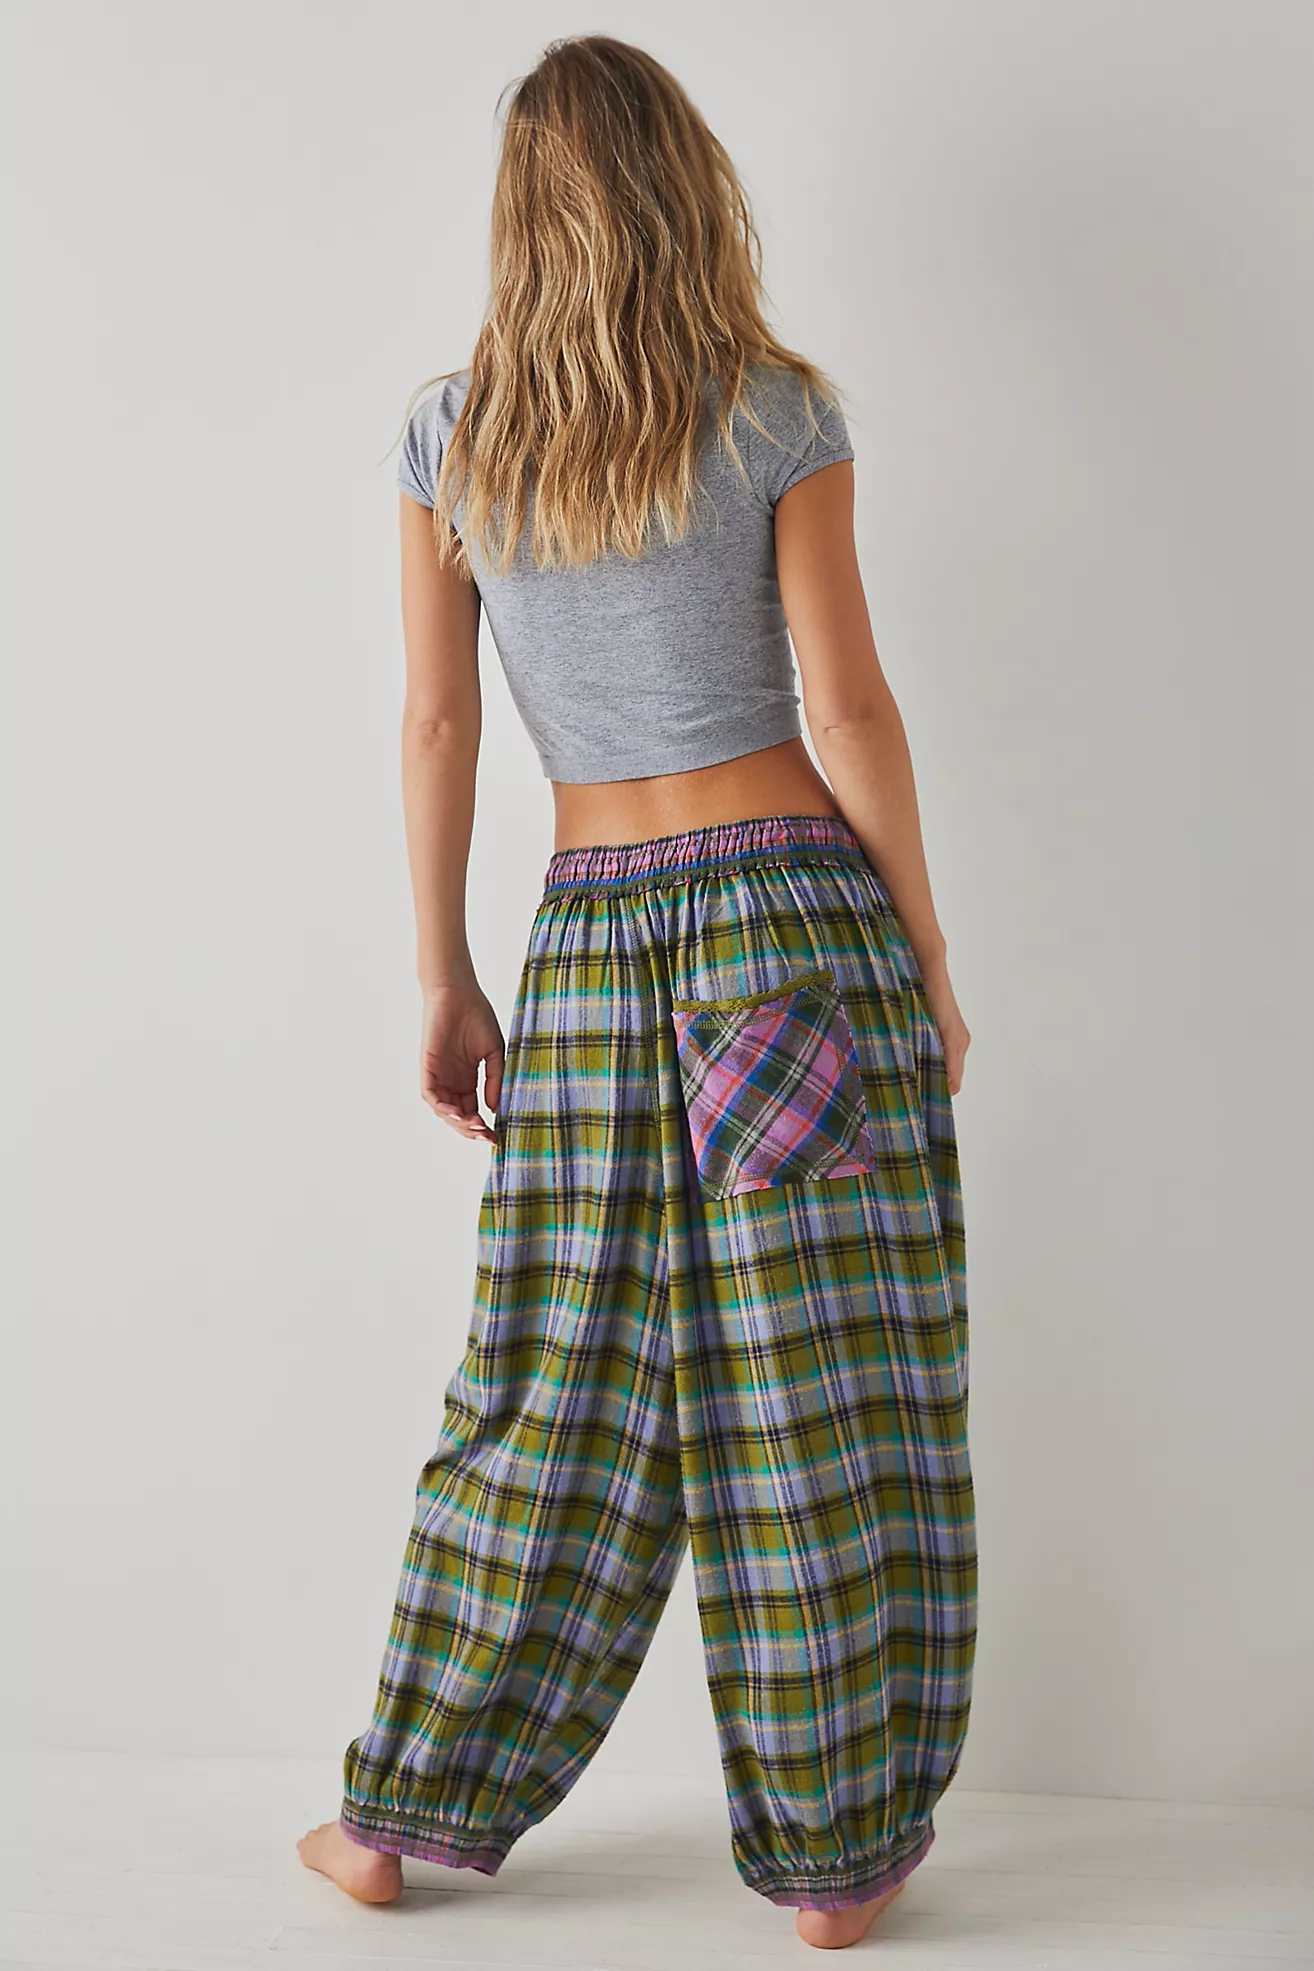 FREE PEOPLE Fallin' For Flannel Lounge Pants